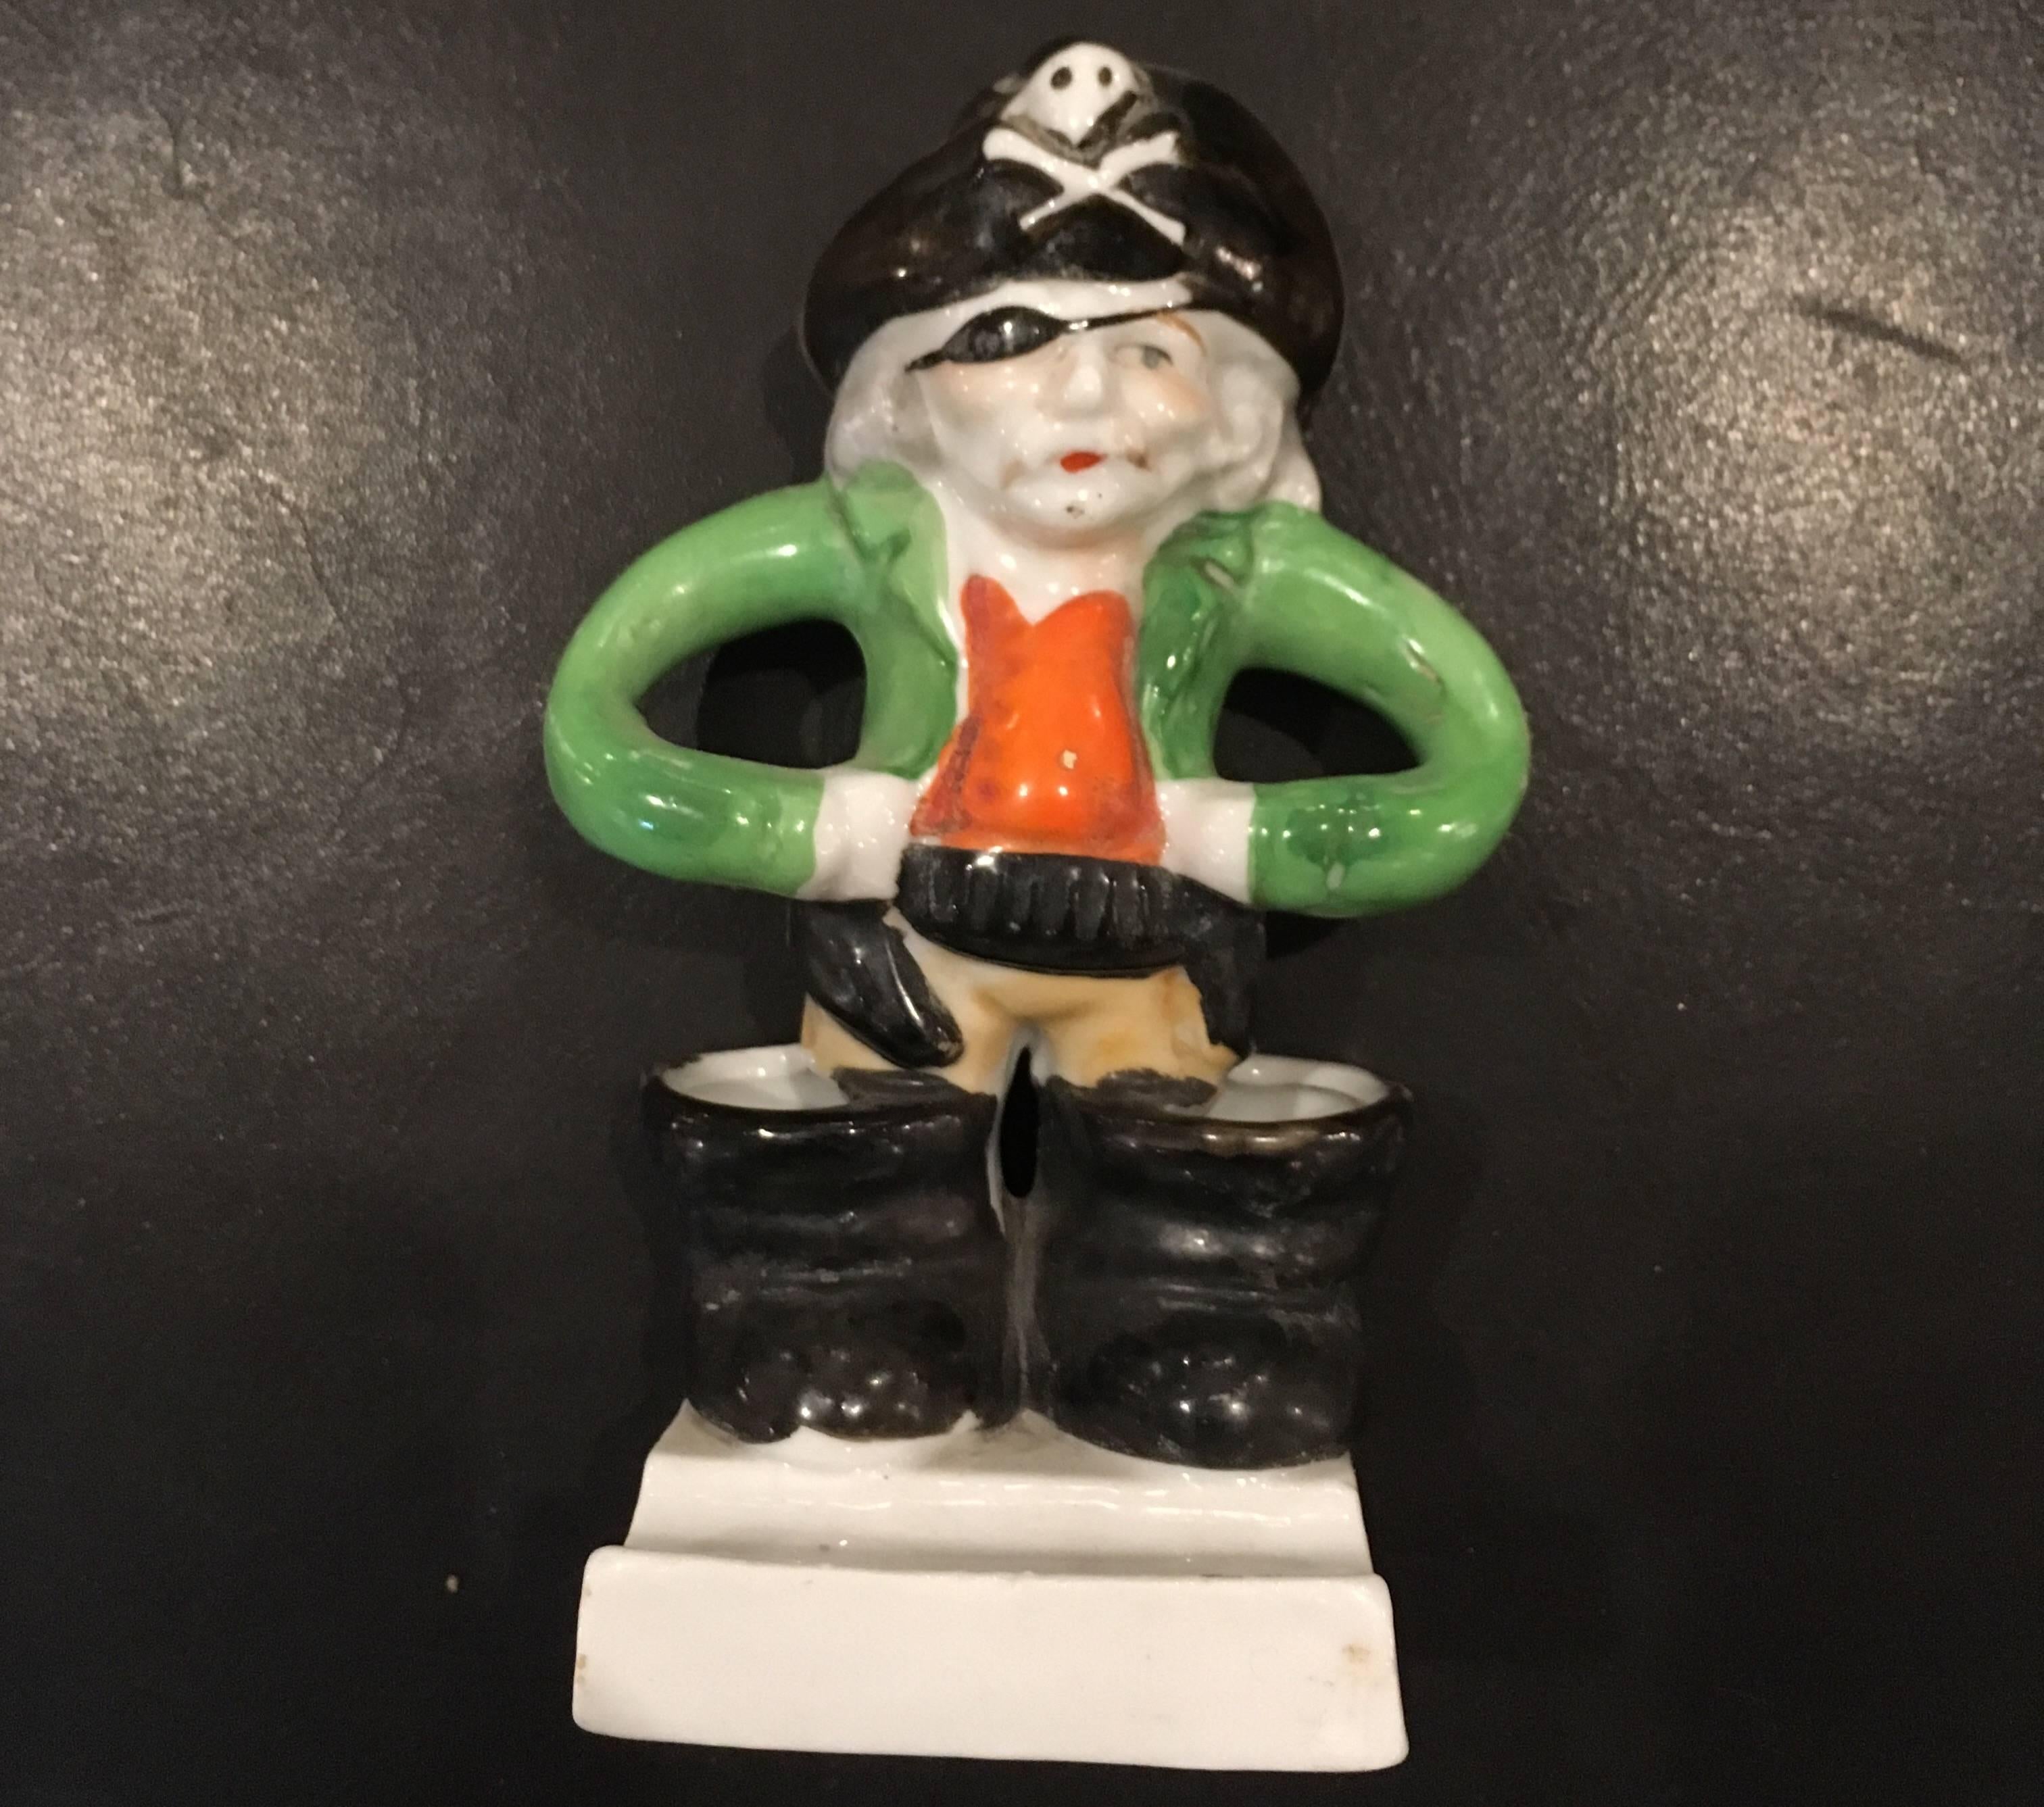 20th Century Pirate Toothbrush Holder from Japan